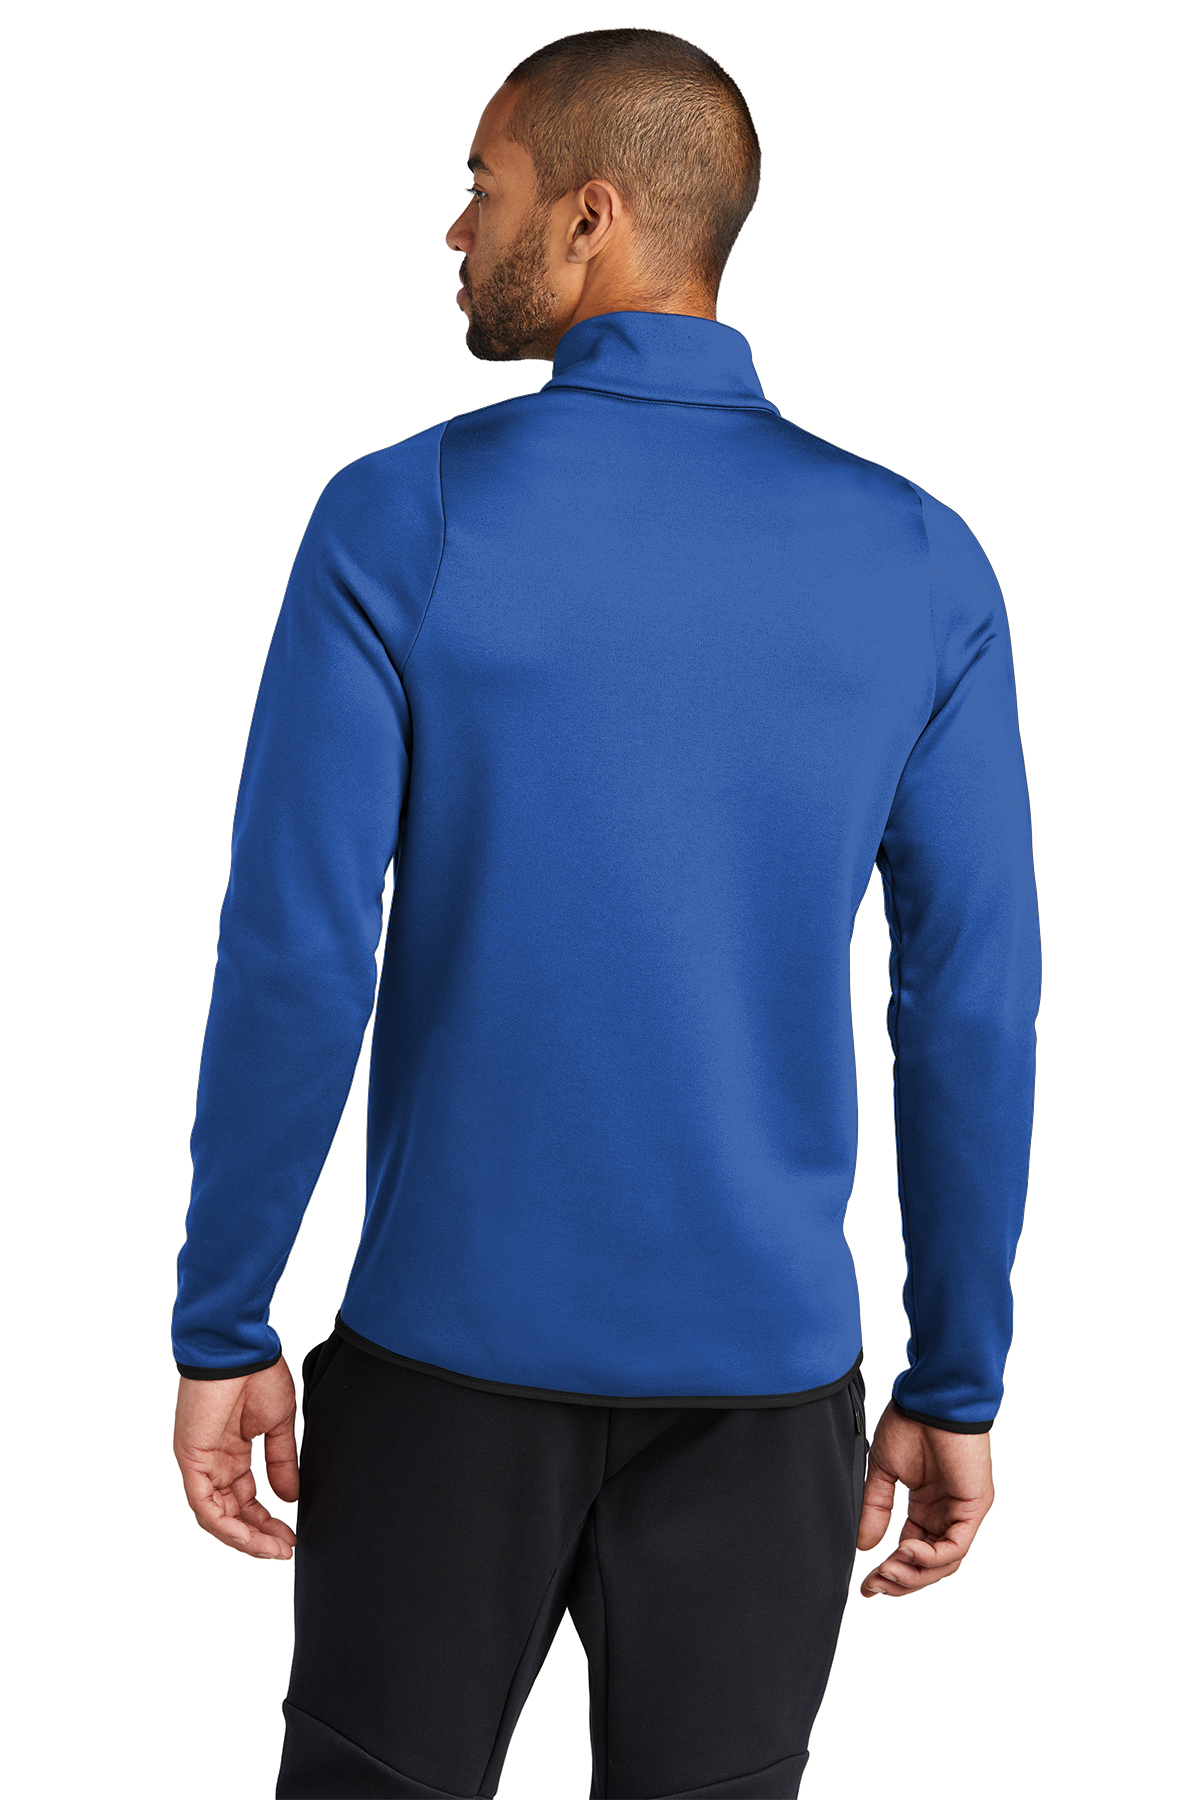 Nike Therma-FIT 1/4-Zip Fleece | Product | Company Casuals